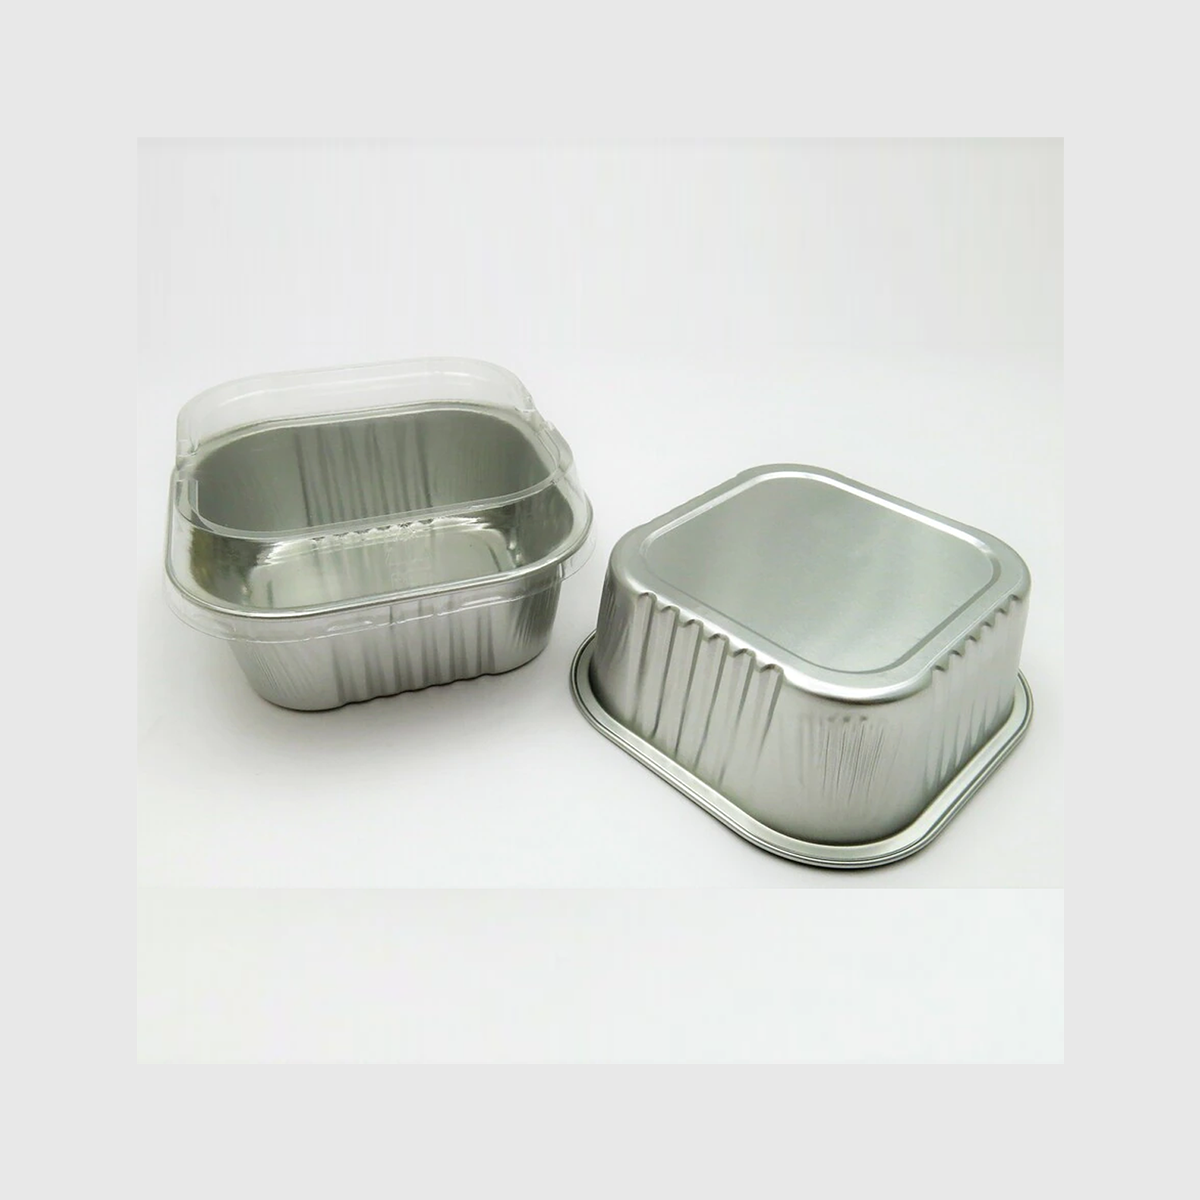 25Pcs Square Foil Cup with Snap-on Plastic Lids (6x2Cms) Silver- WILLOW